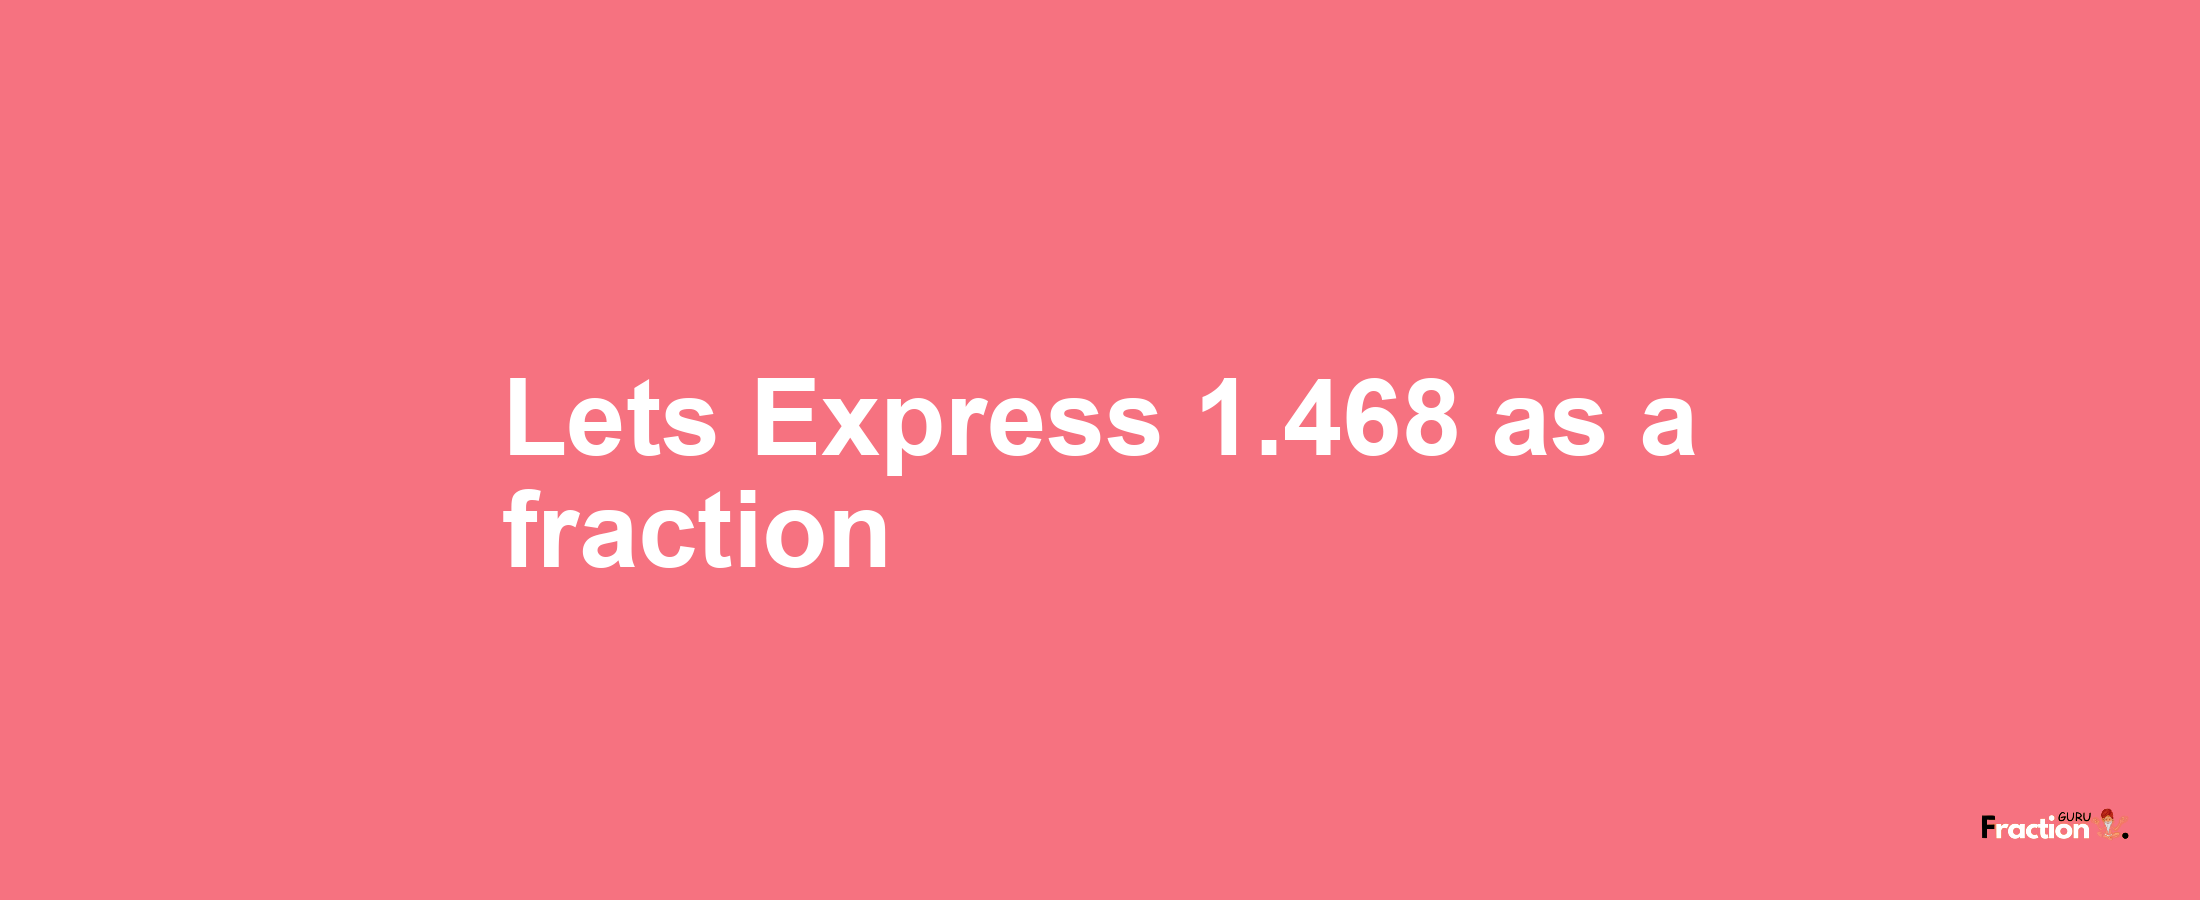 Lets Express 1.468 as afraction